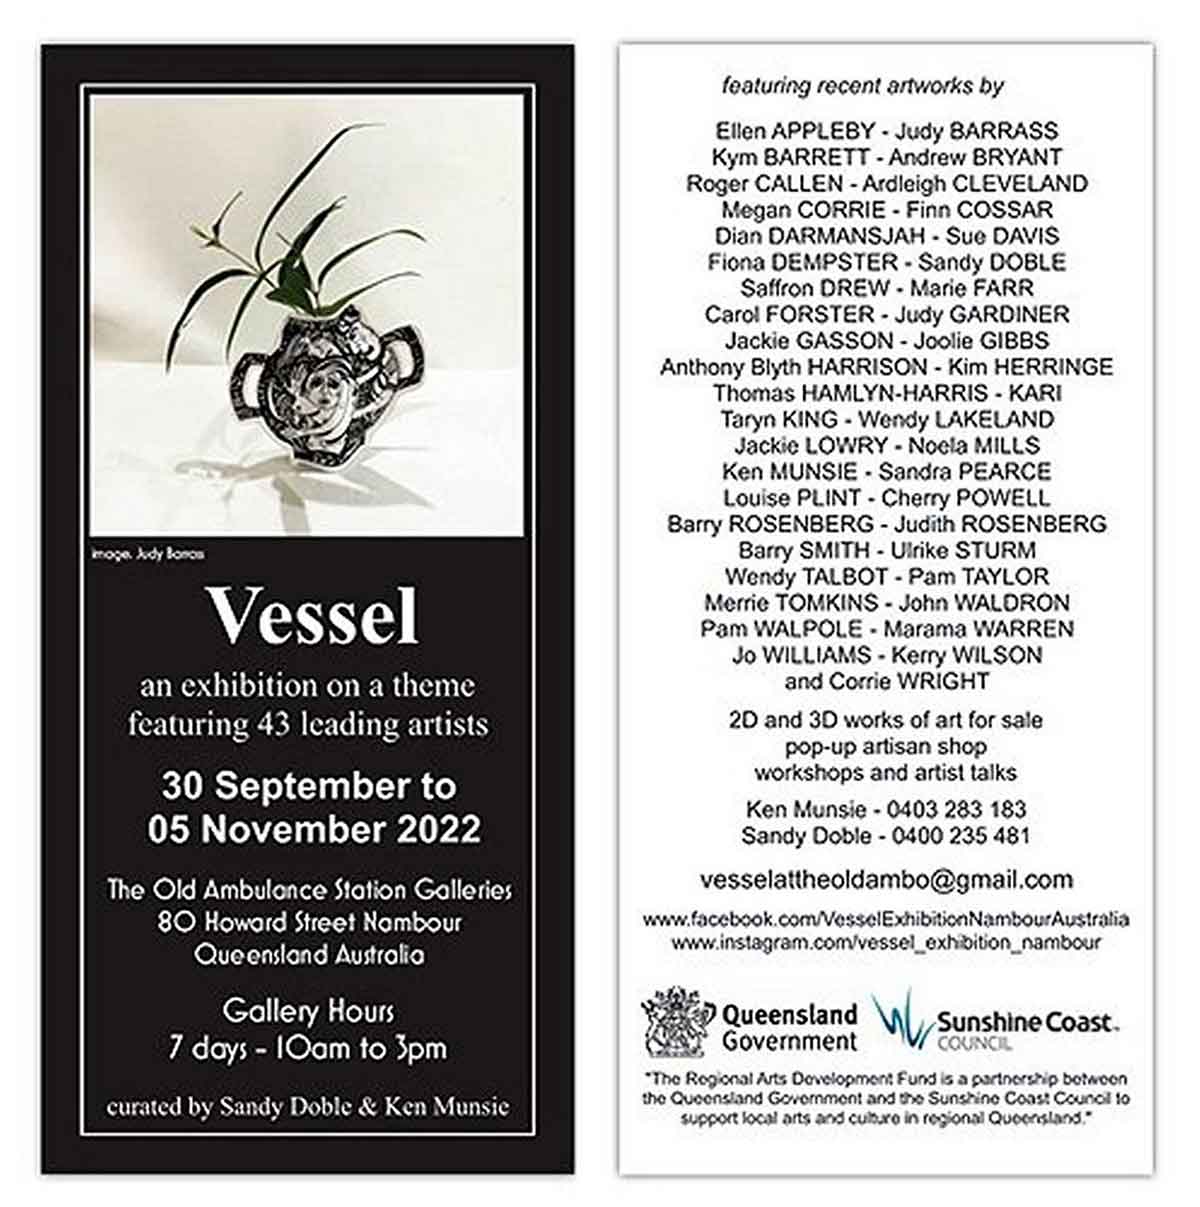 Vessel Exhibition, Nambour Old Ambulance Station Galleries